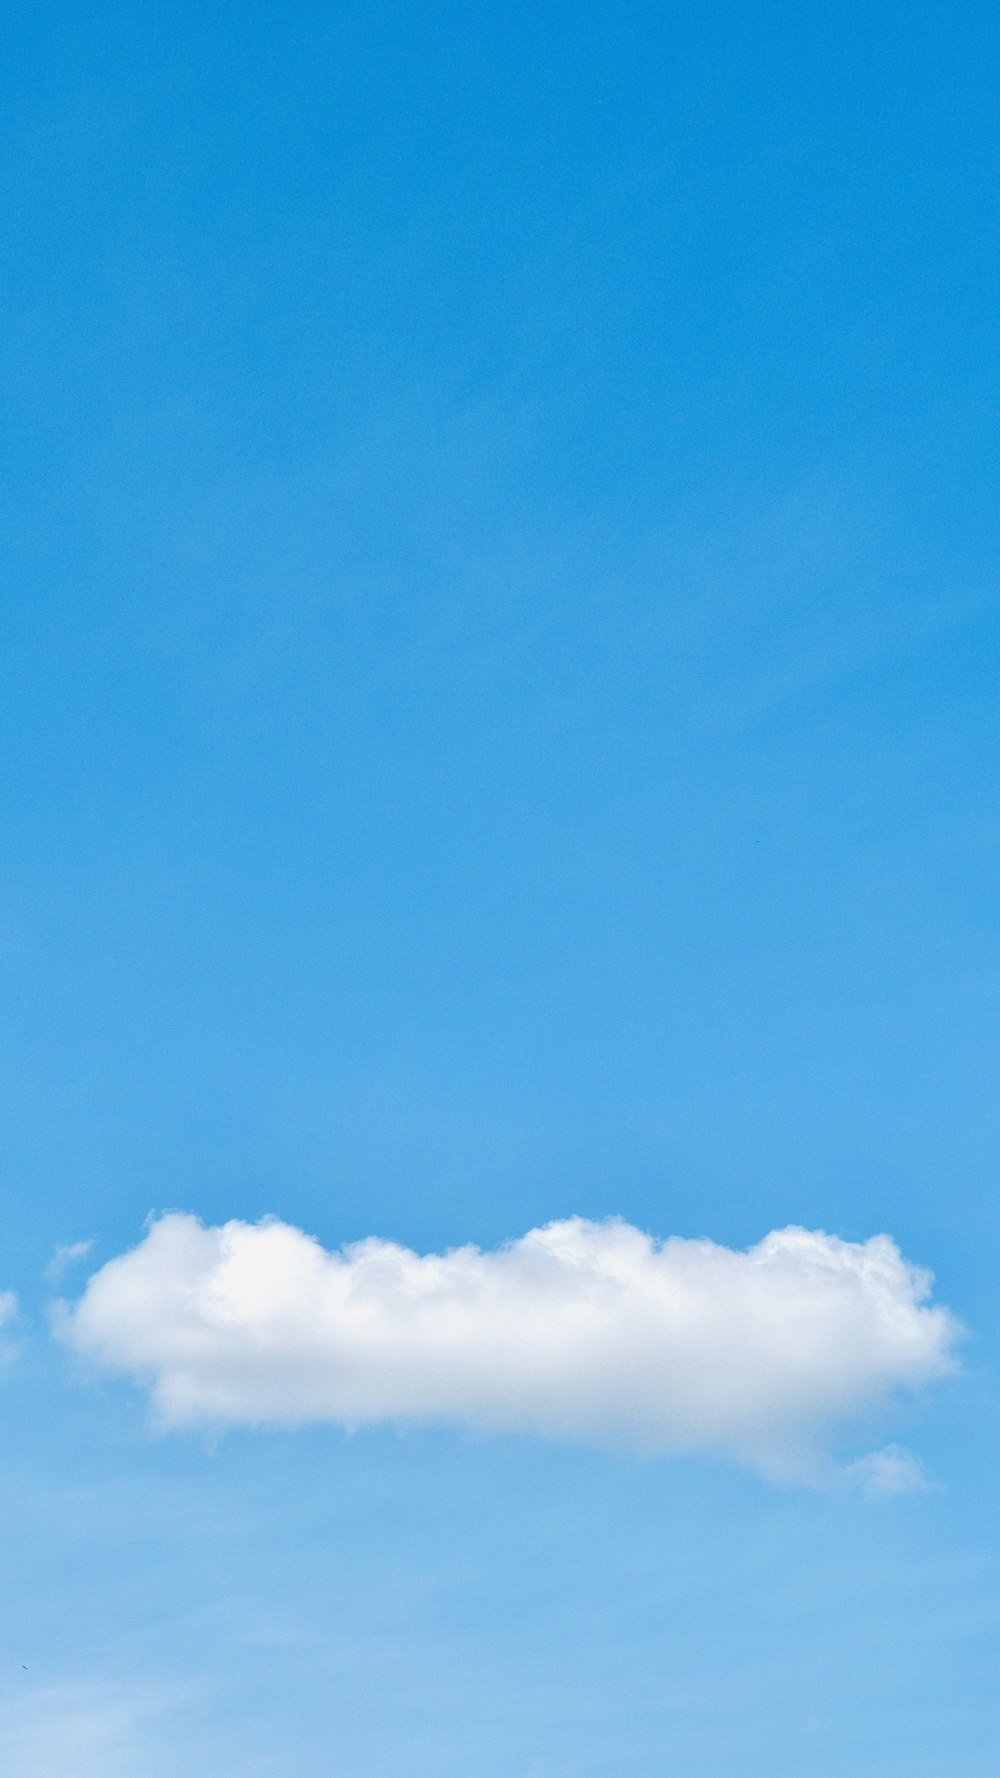 a plane flying in the sky with a cloud in the background